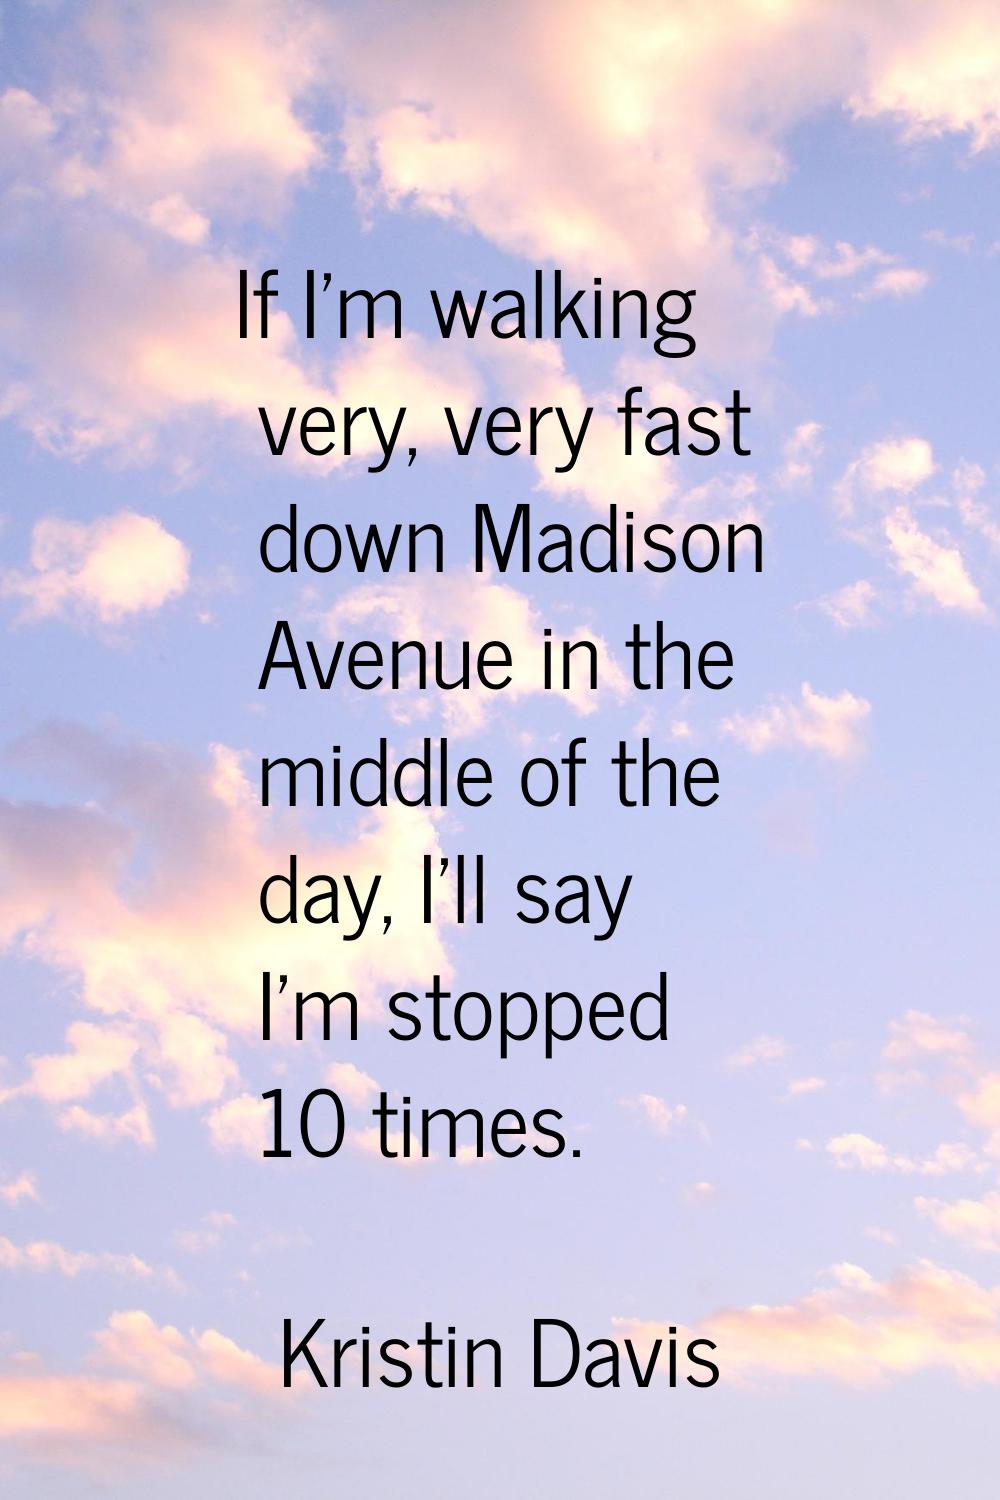 If I'm walking very, very fast down Madison Avenue in the middle of the day, I'll say I'm stopped 1